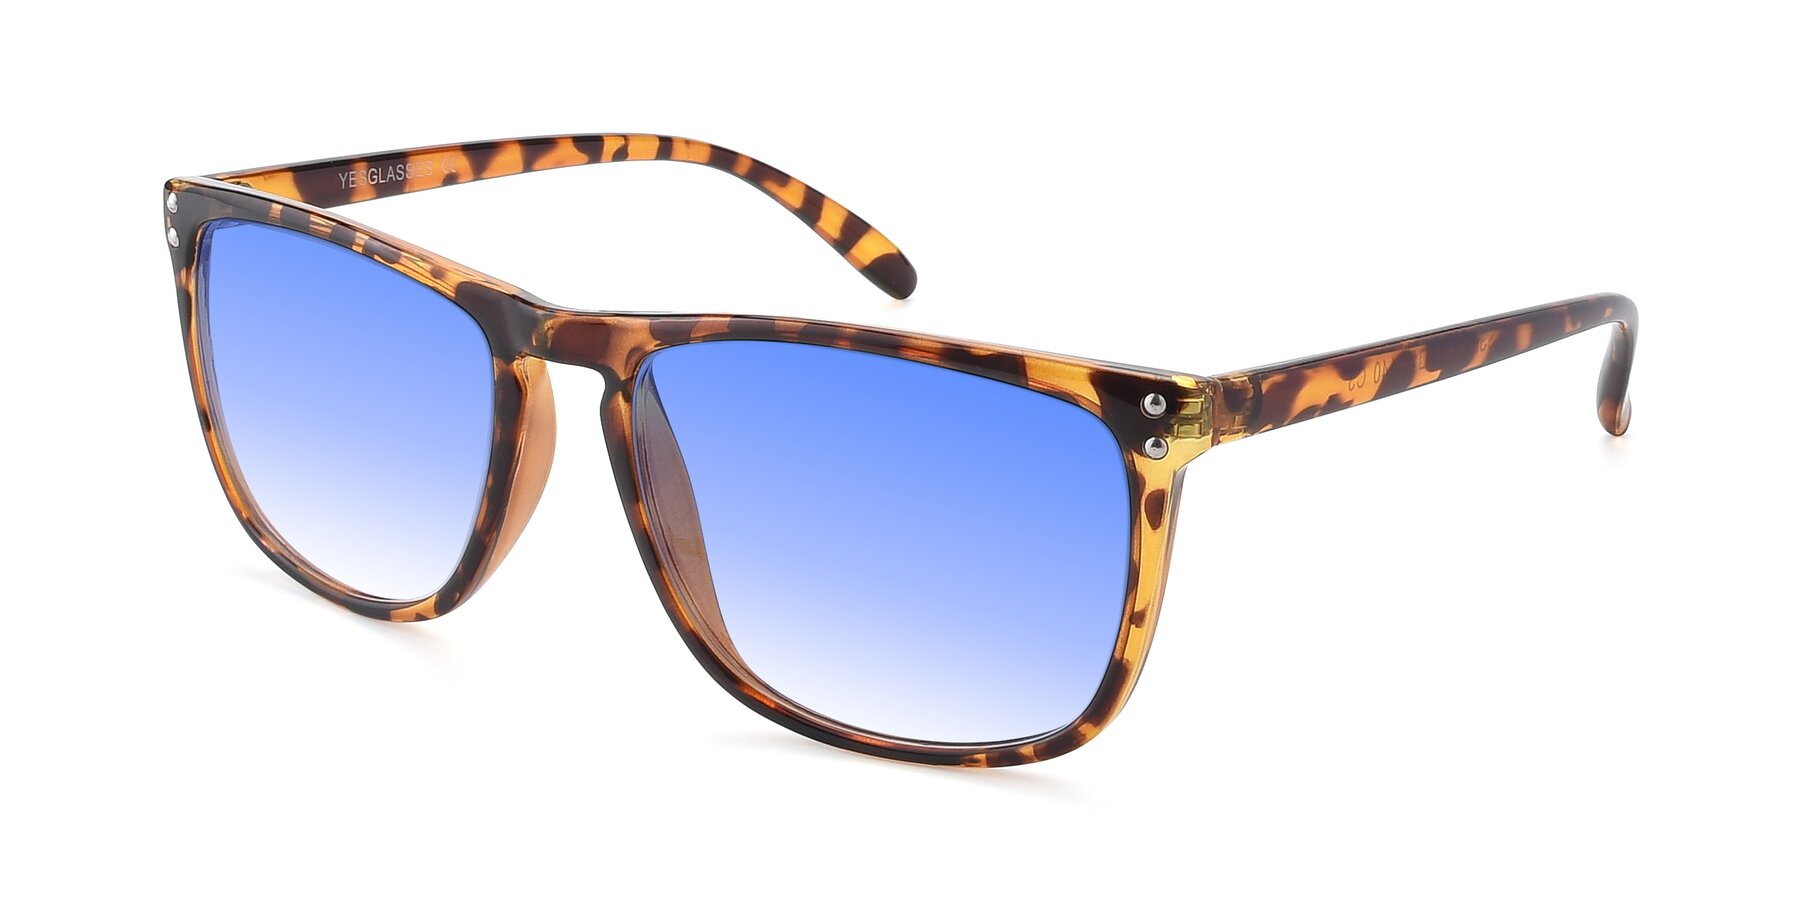 Angle of SSR411 in Translucent Orange Tortoise with Blue Gradient Lenses